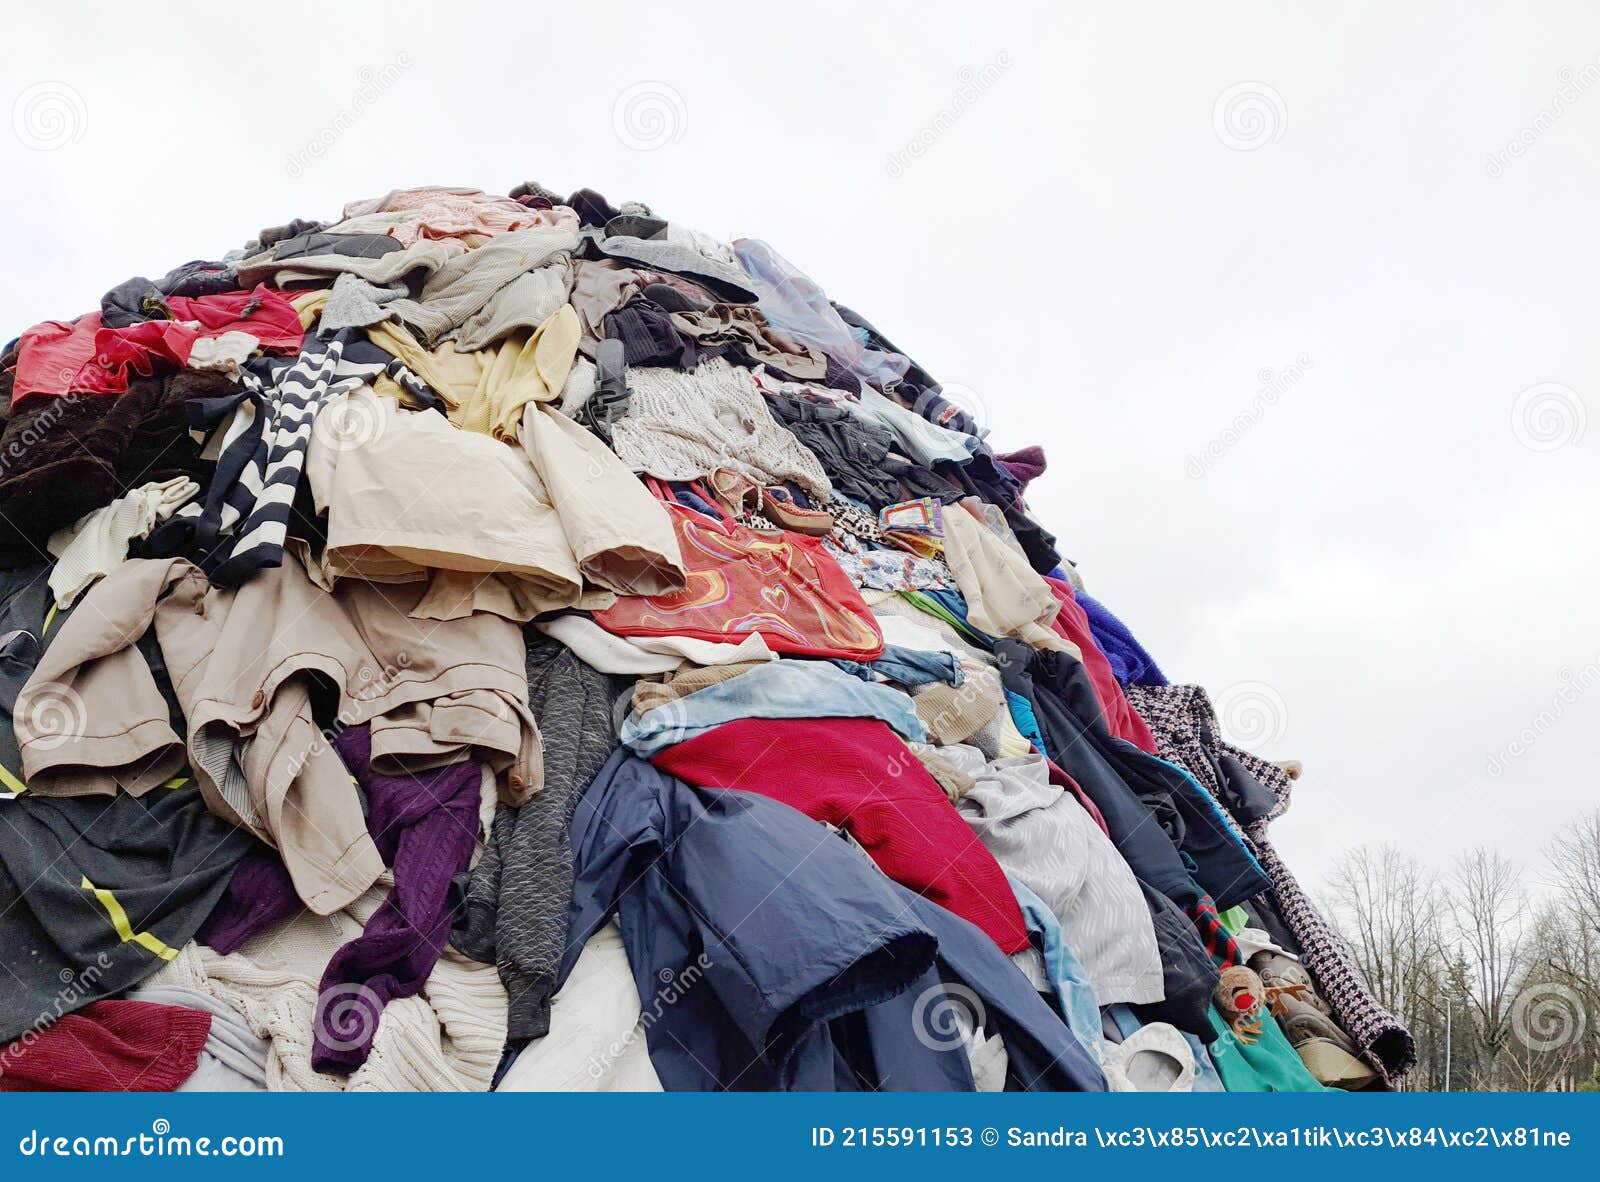 large pile stack of textile fabric clothes and shoes. concept of  fashion industry pollution, sustainability, reuse of garment.